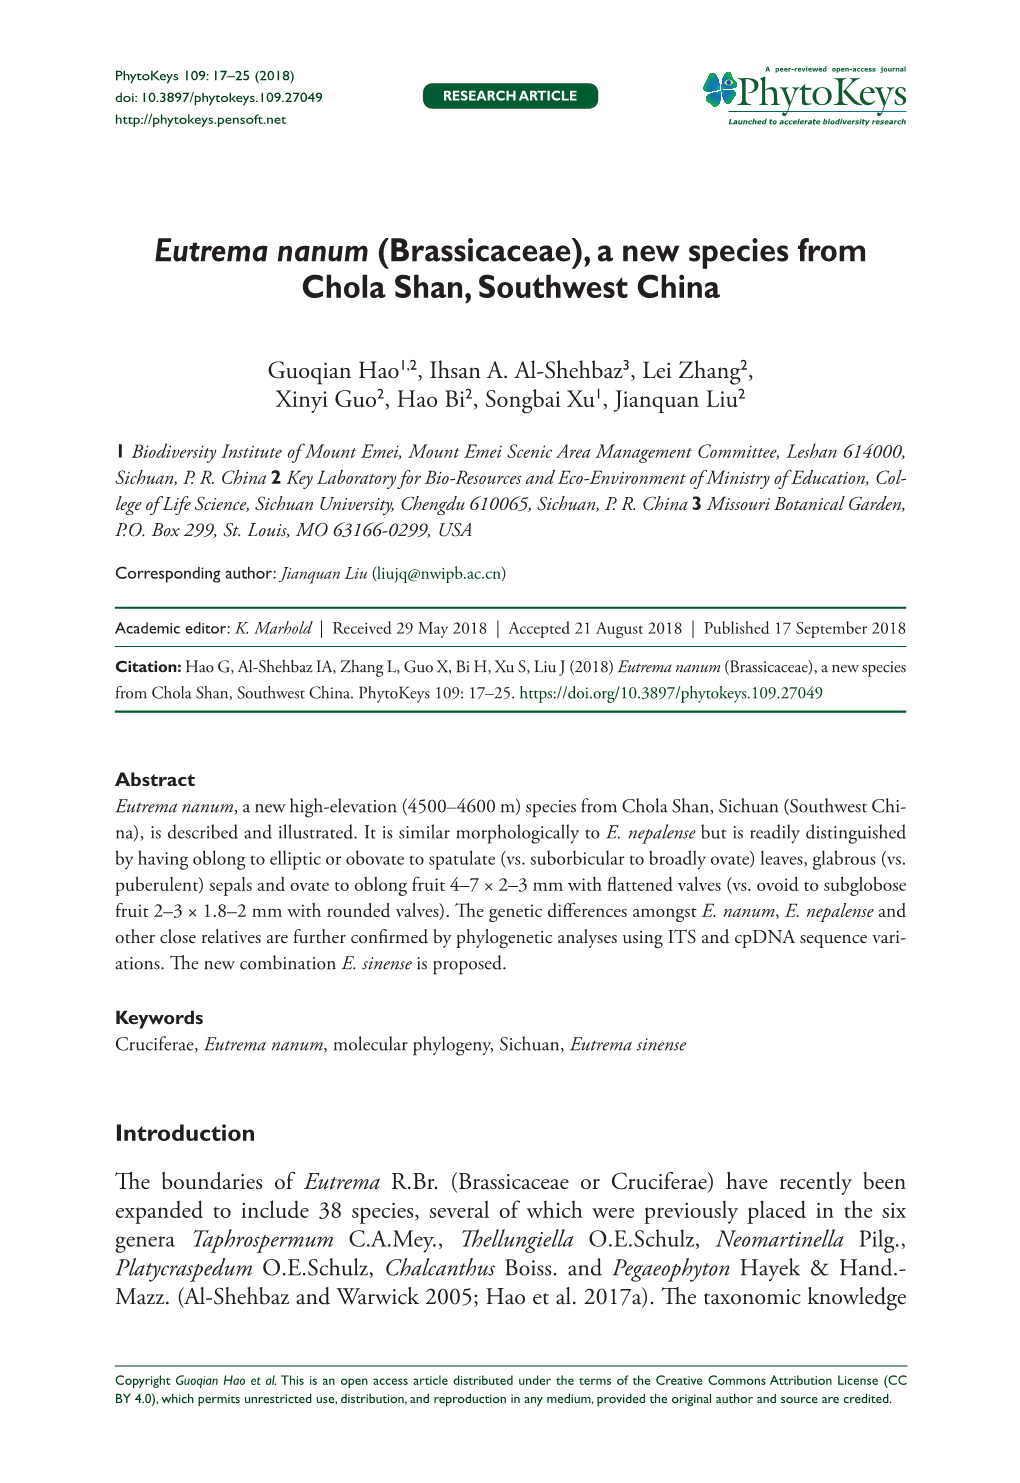 (Brassicaceae), a New Species from Chola Shan, Southwest China